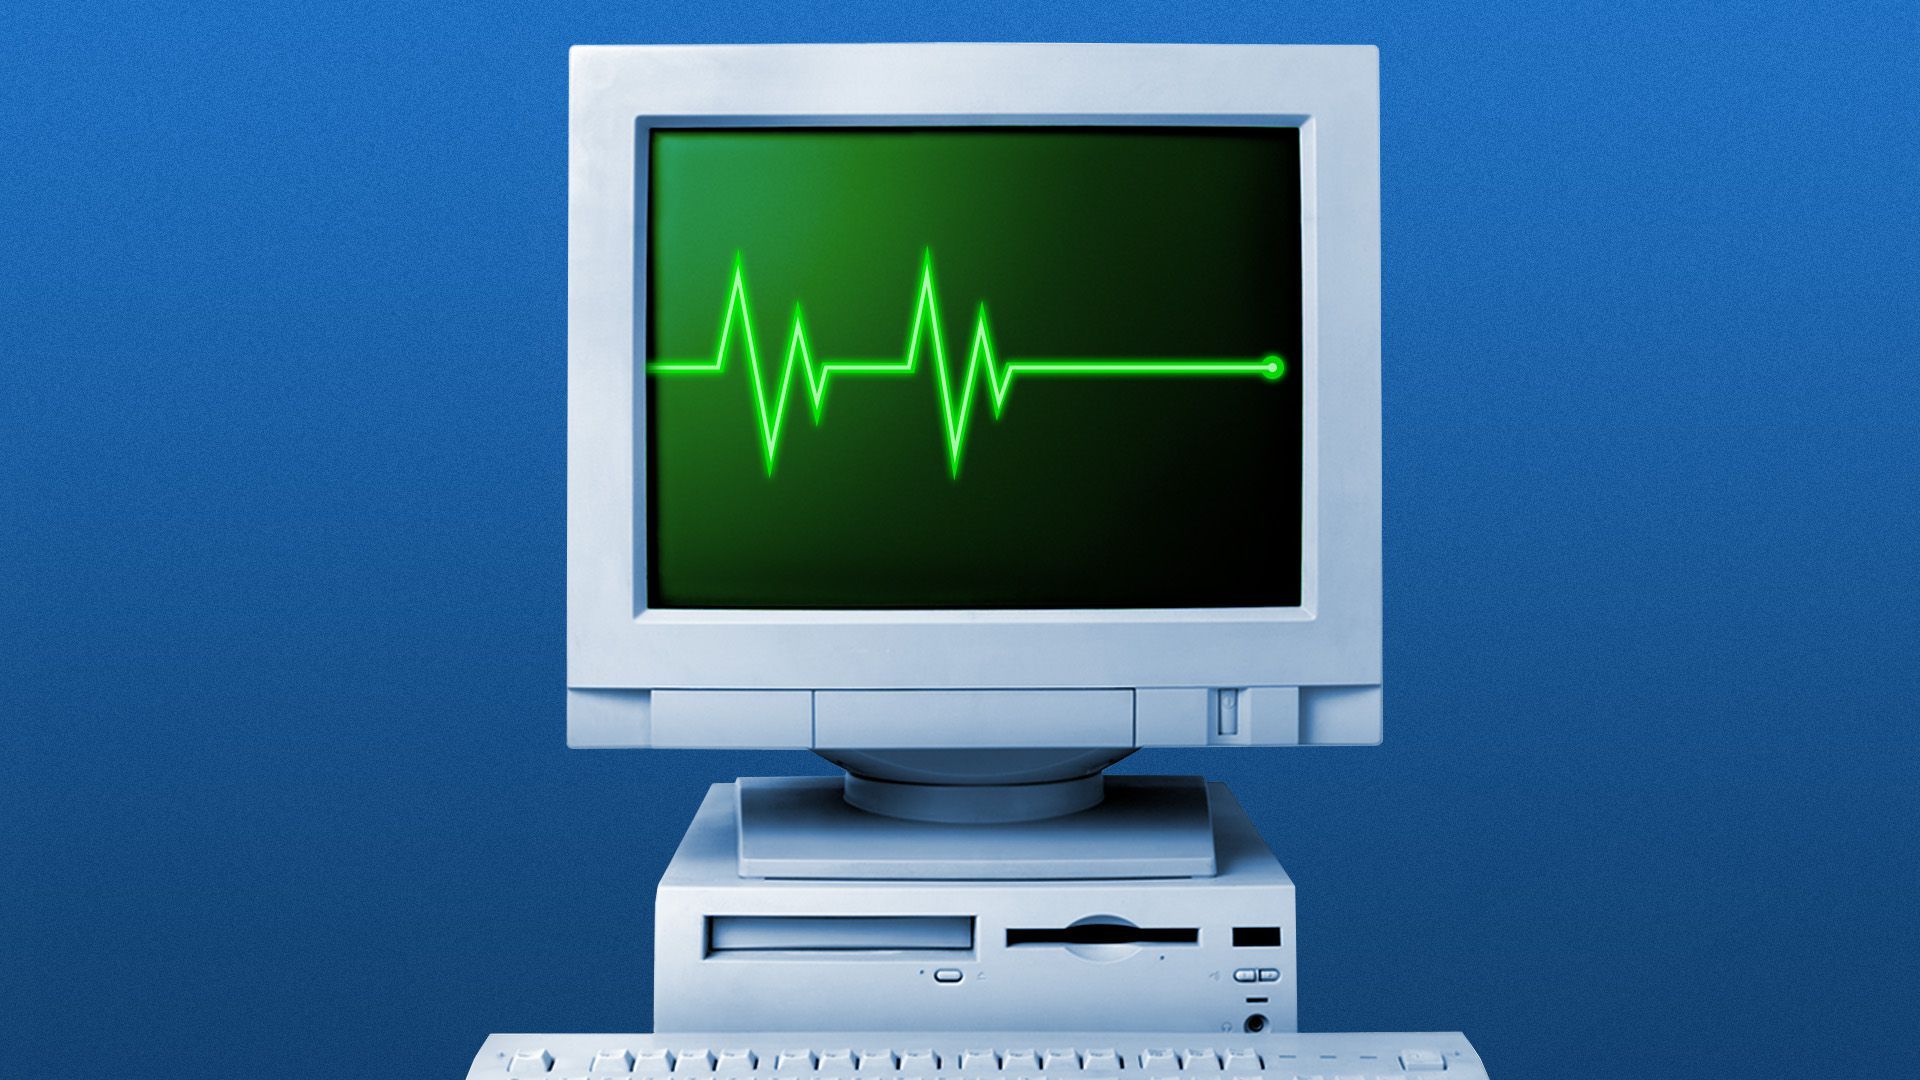 Illustration of a computer with a flatlining EKG on the screen